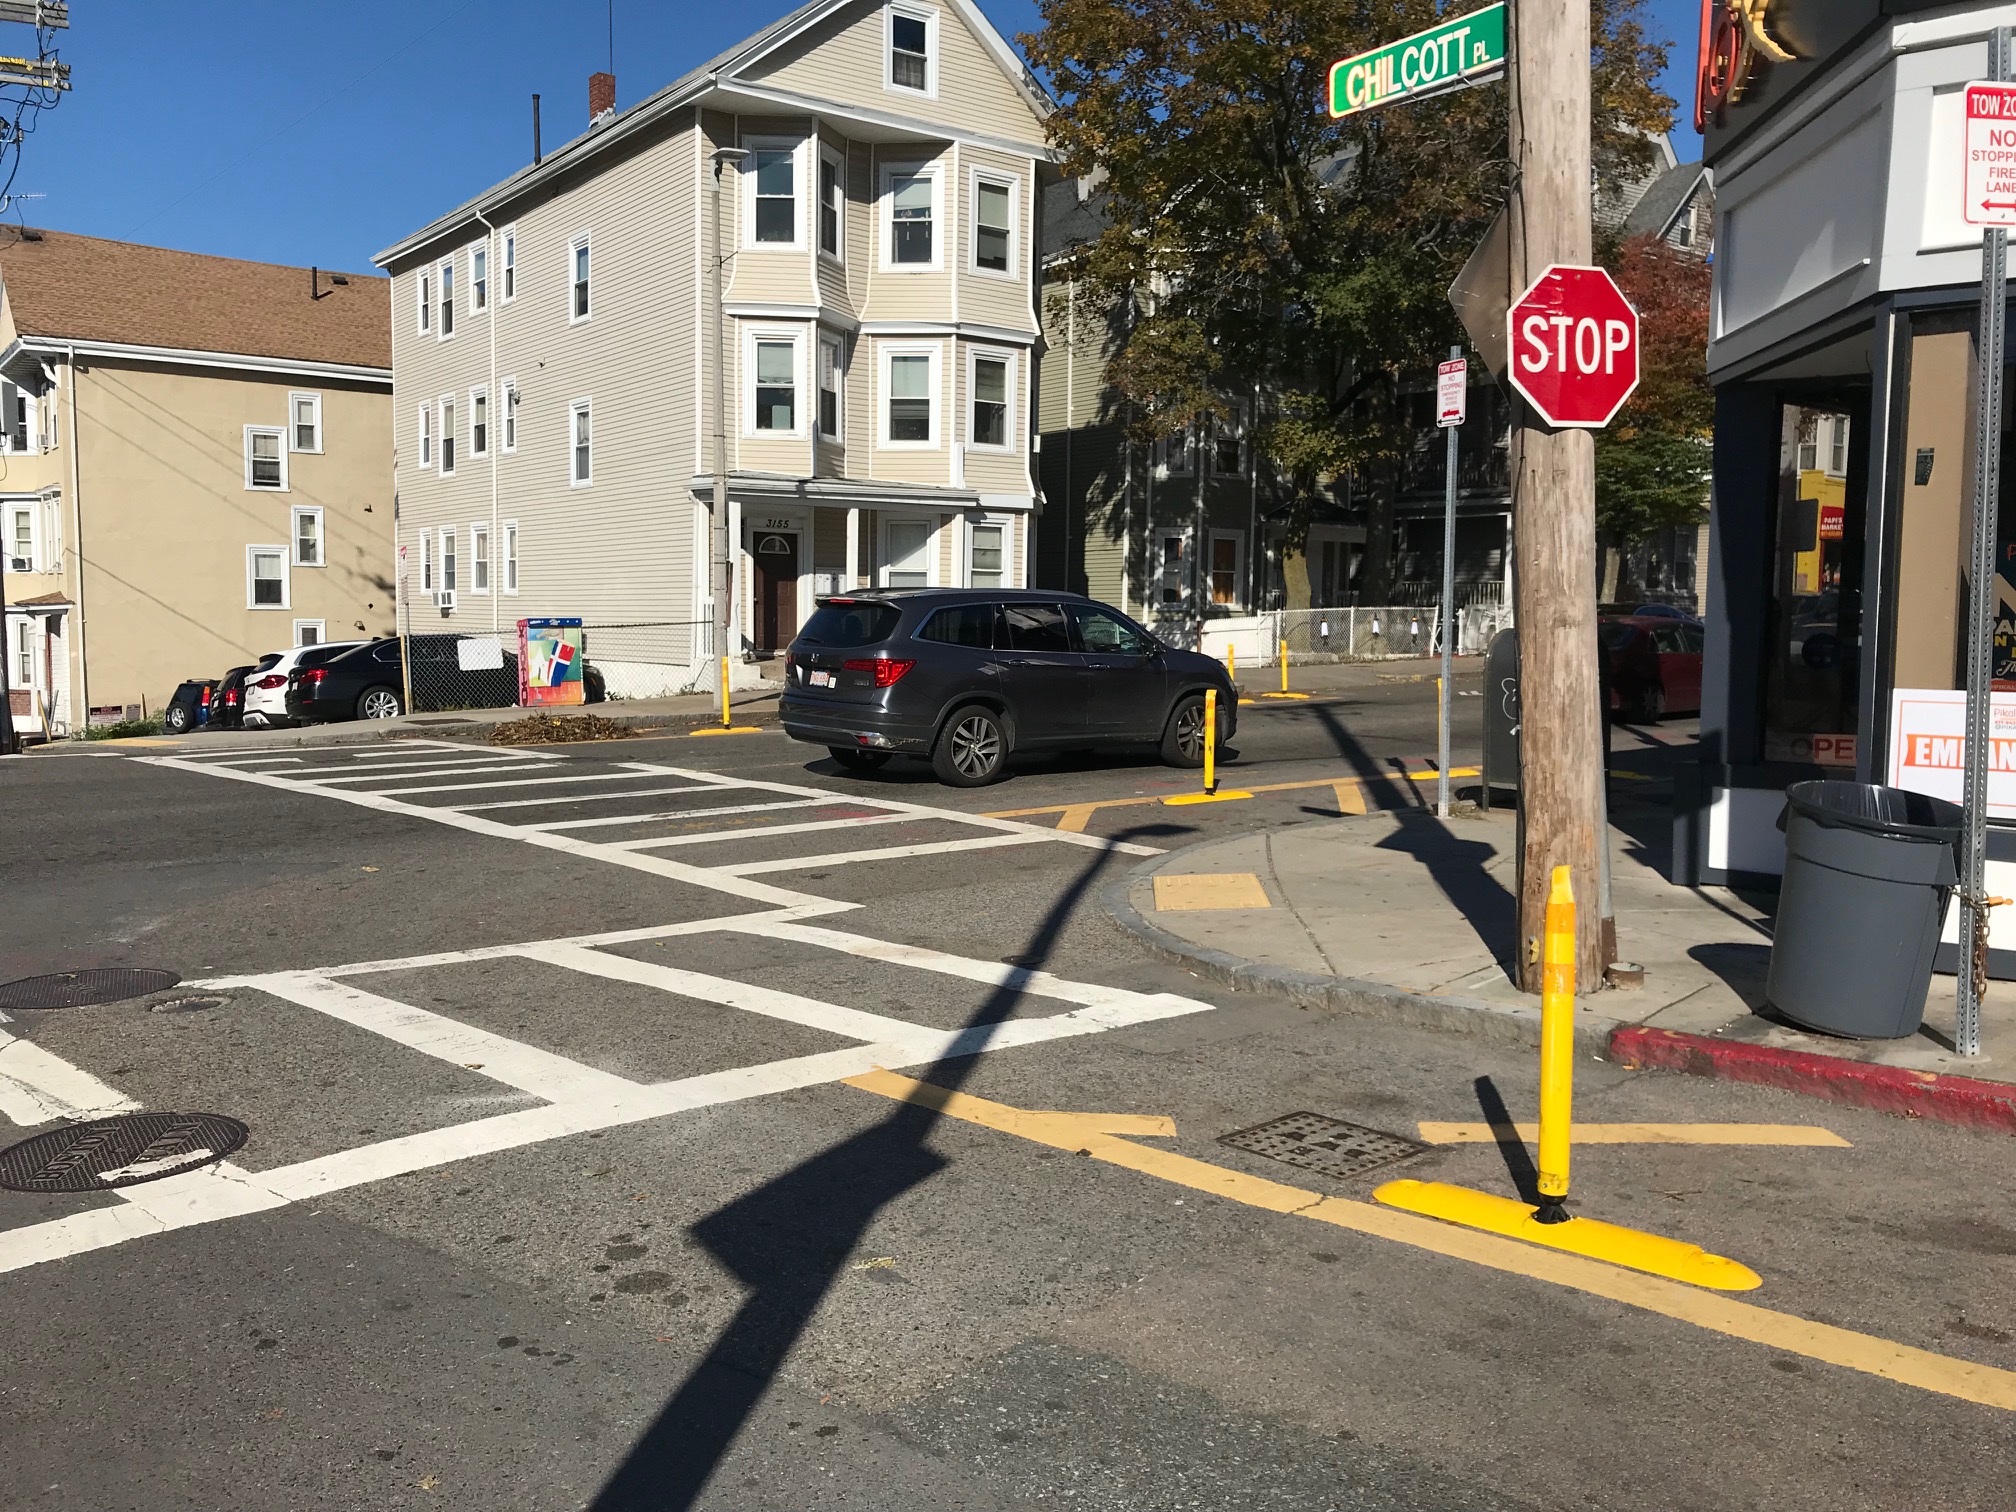 New flexible post bollards keep cars away from crosswalks at the intersection of Washington Ave. and Chilcott Pl. near Egleston Square in Roxbury.